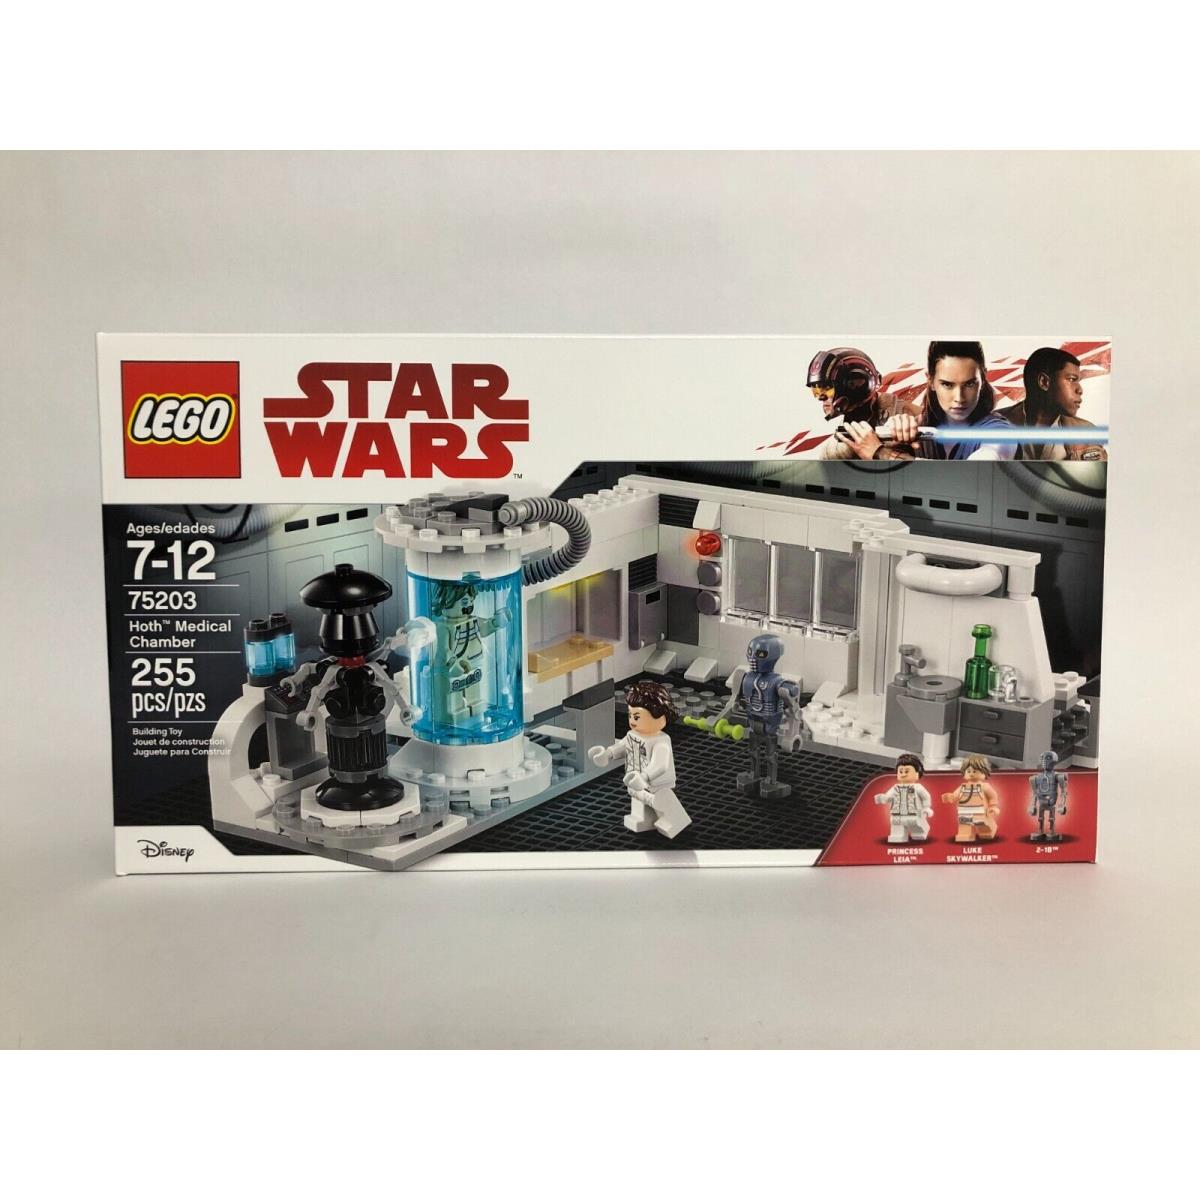 Lego Star Wars 75203 Hoth Medical Chamber - - - Retired